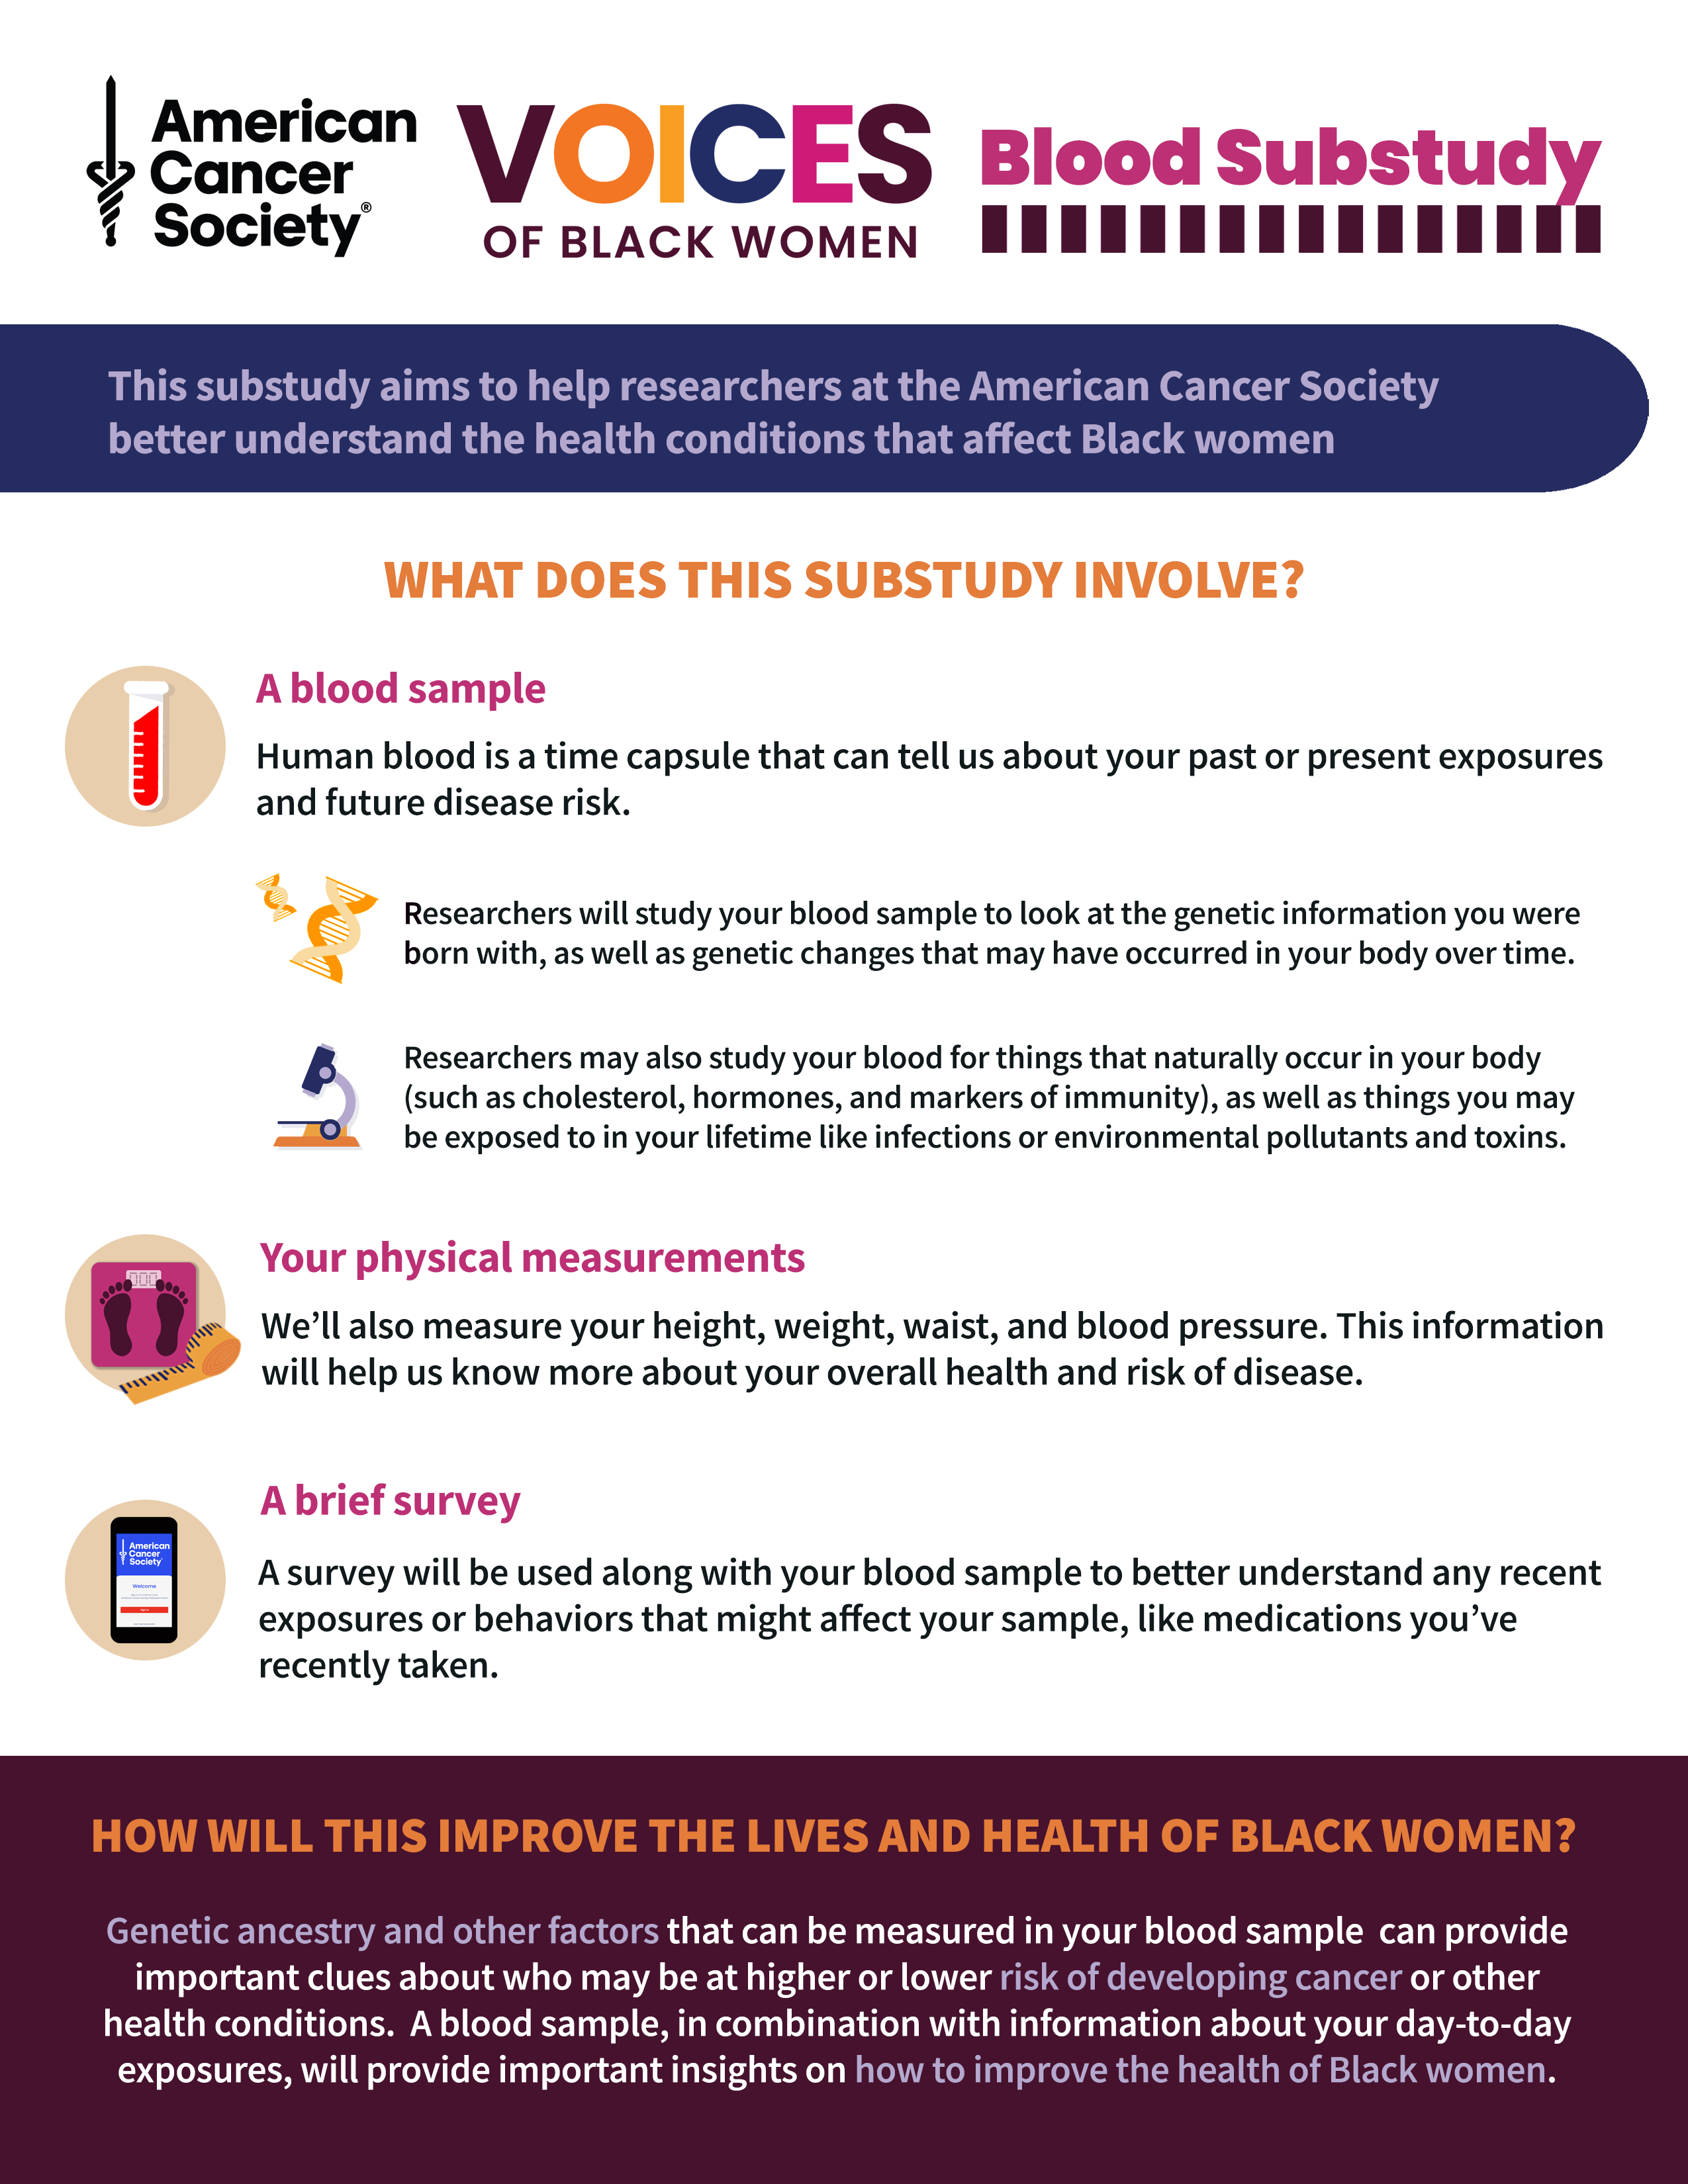 VOICES of Black Women Blood Substudy Infographic 1